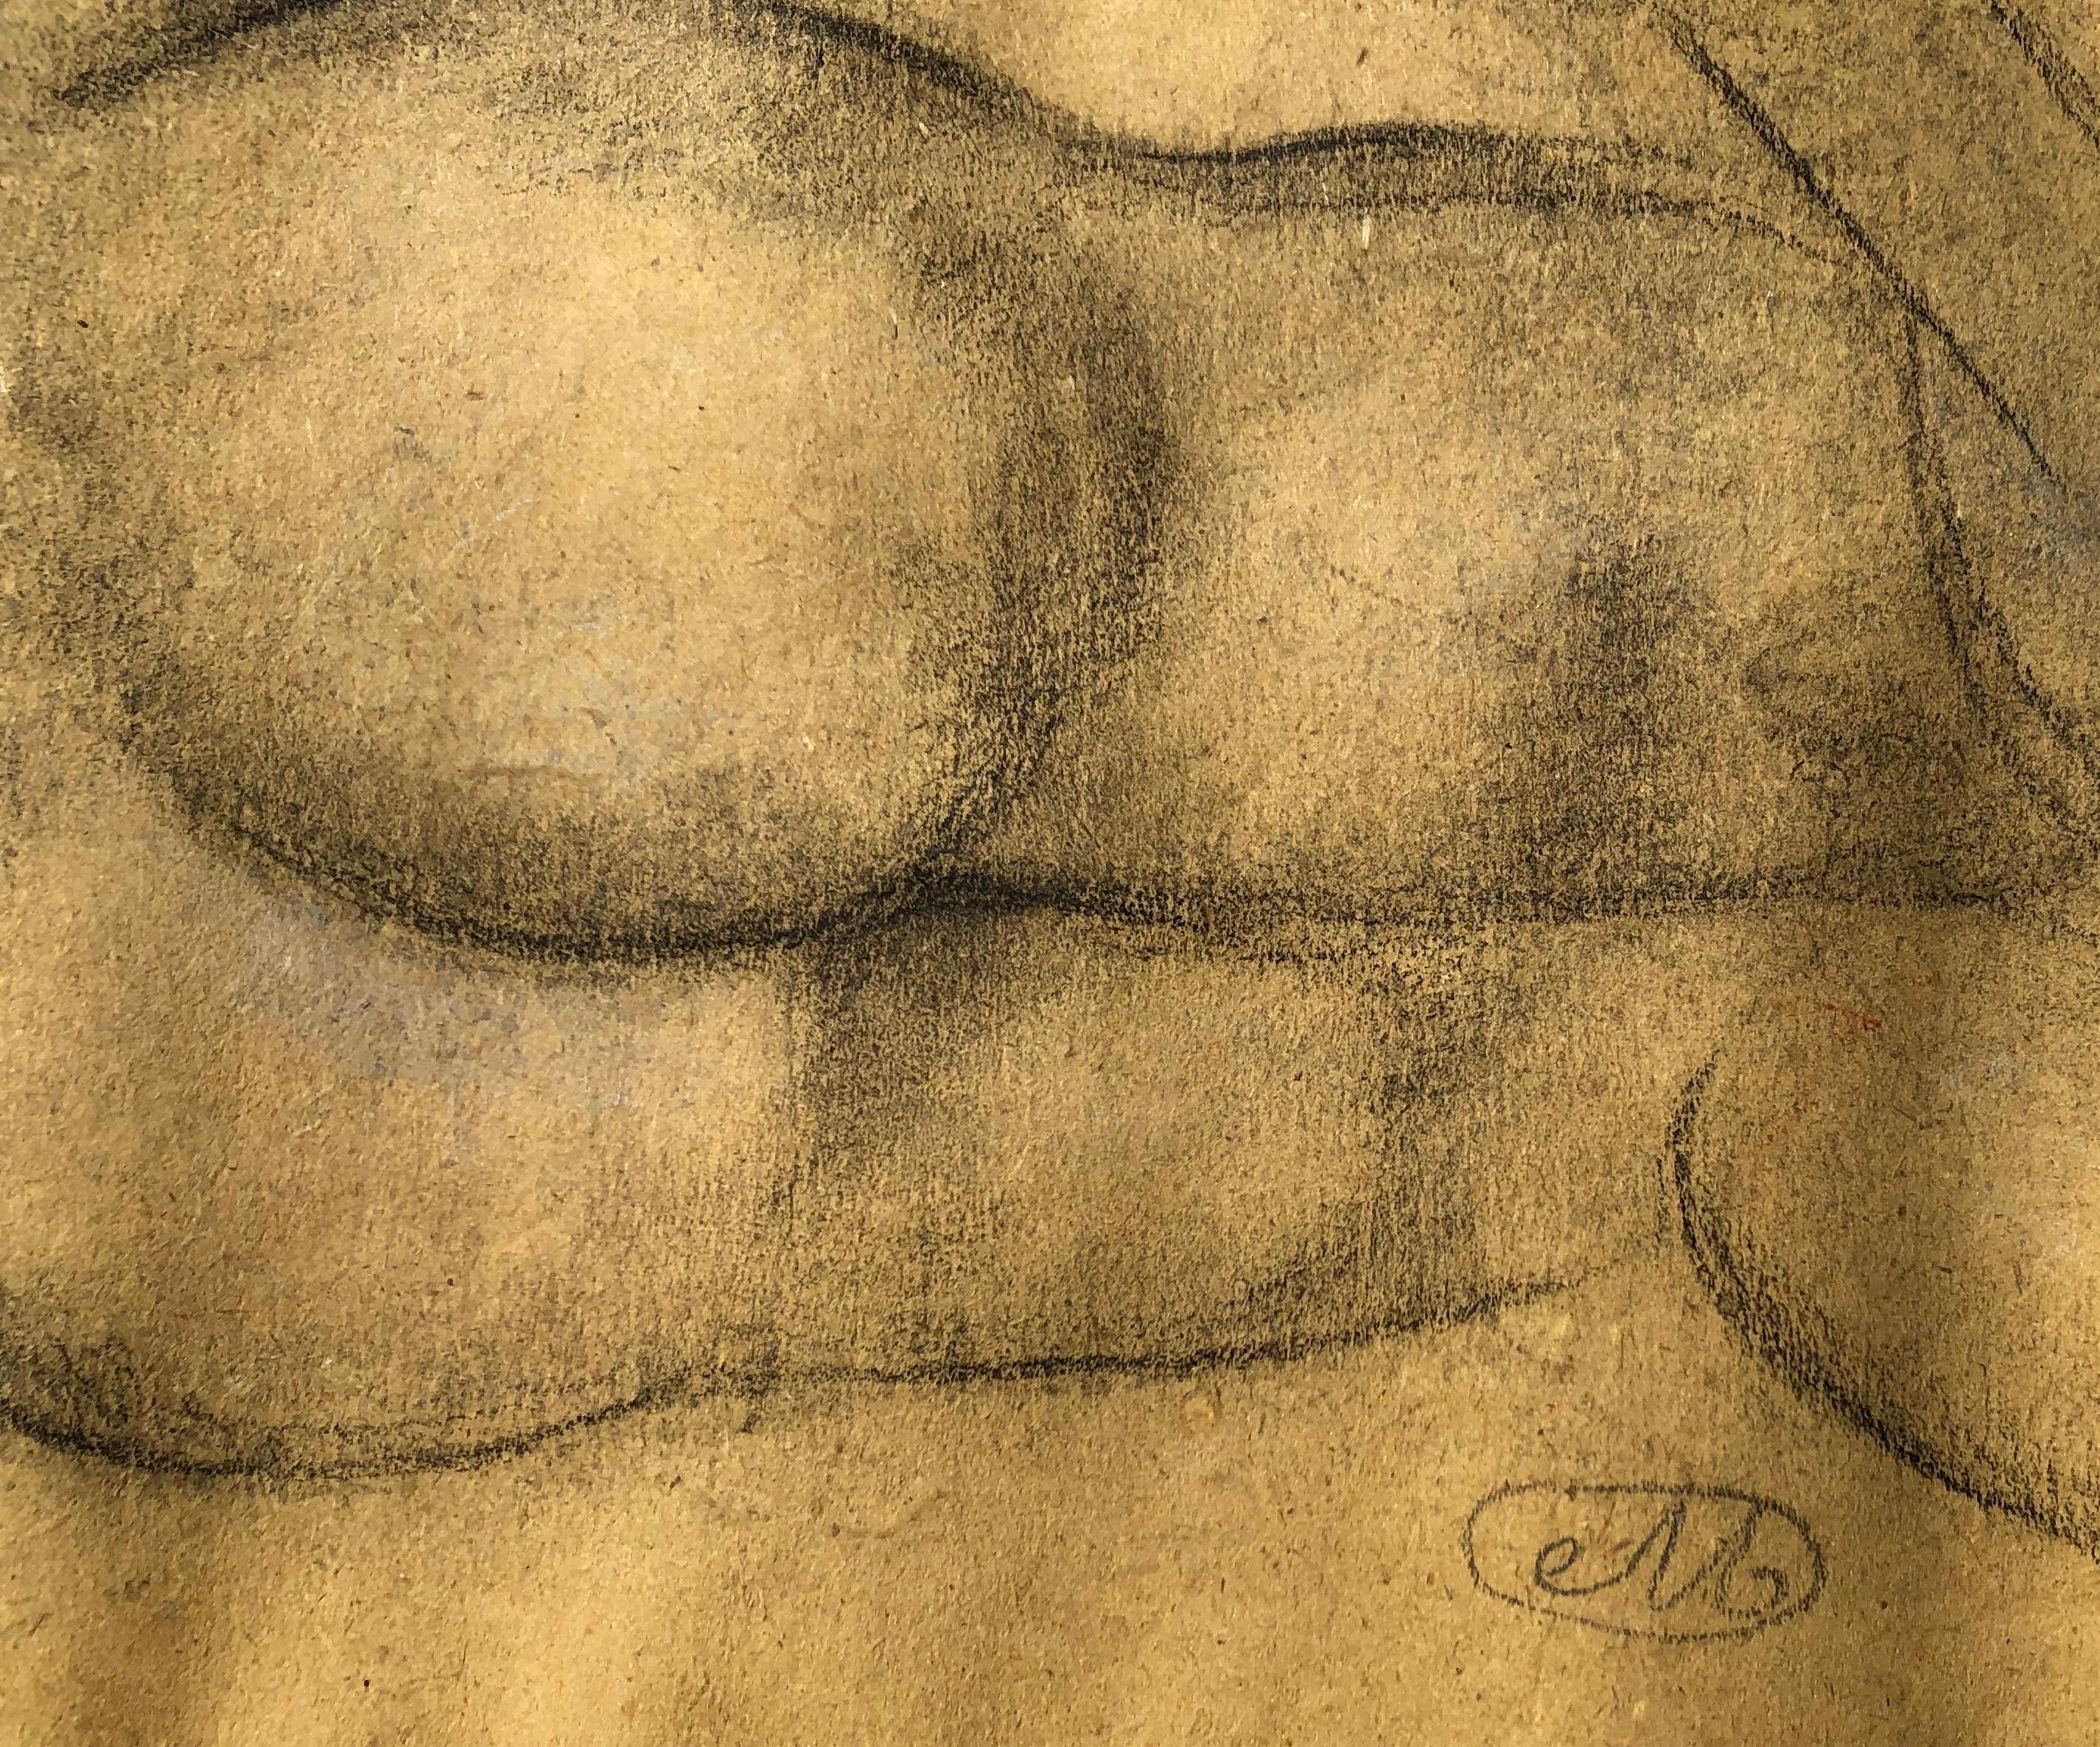 Aristide Maillol Charcoal Drawing “Nu De Dos” For Sale 3